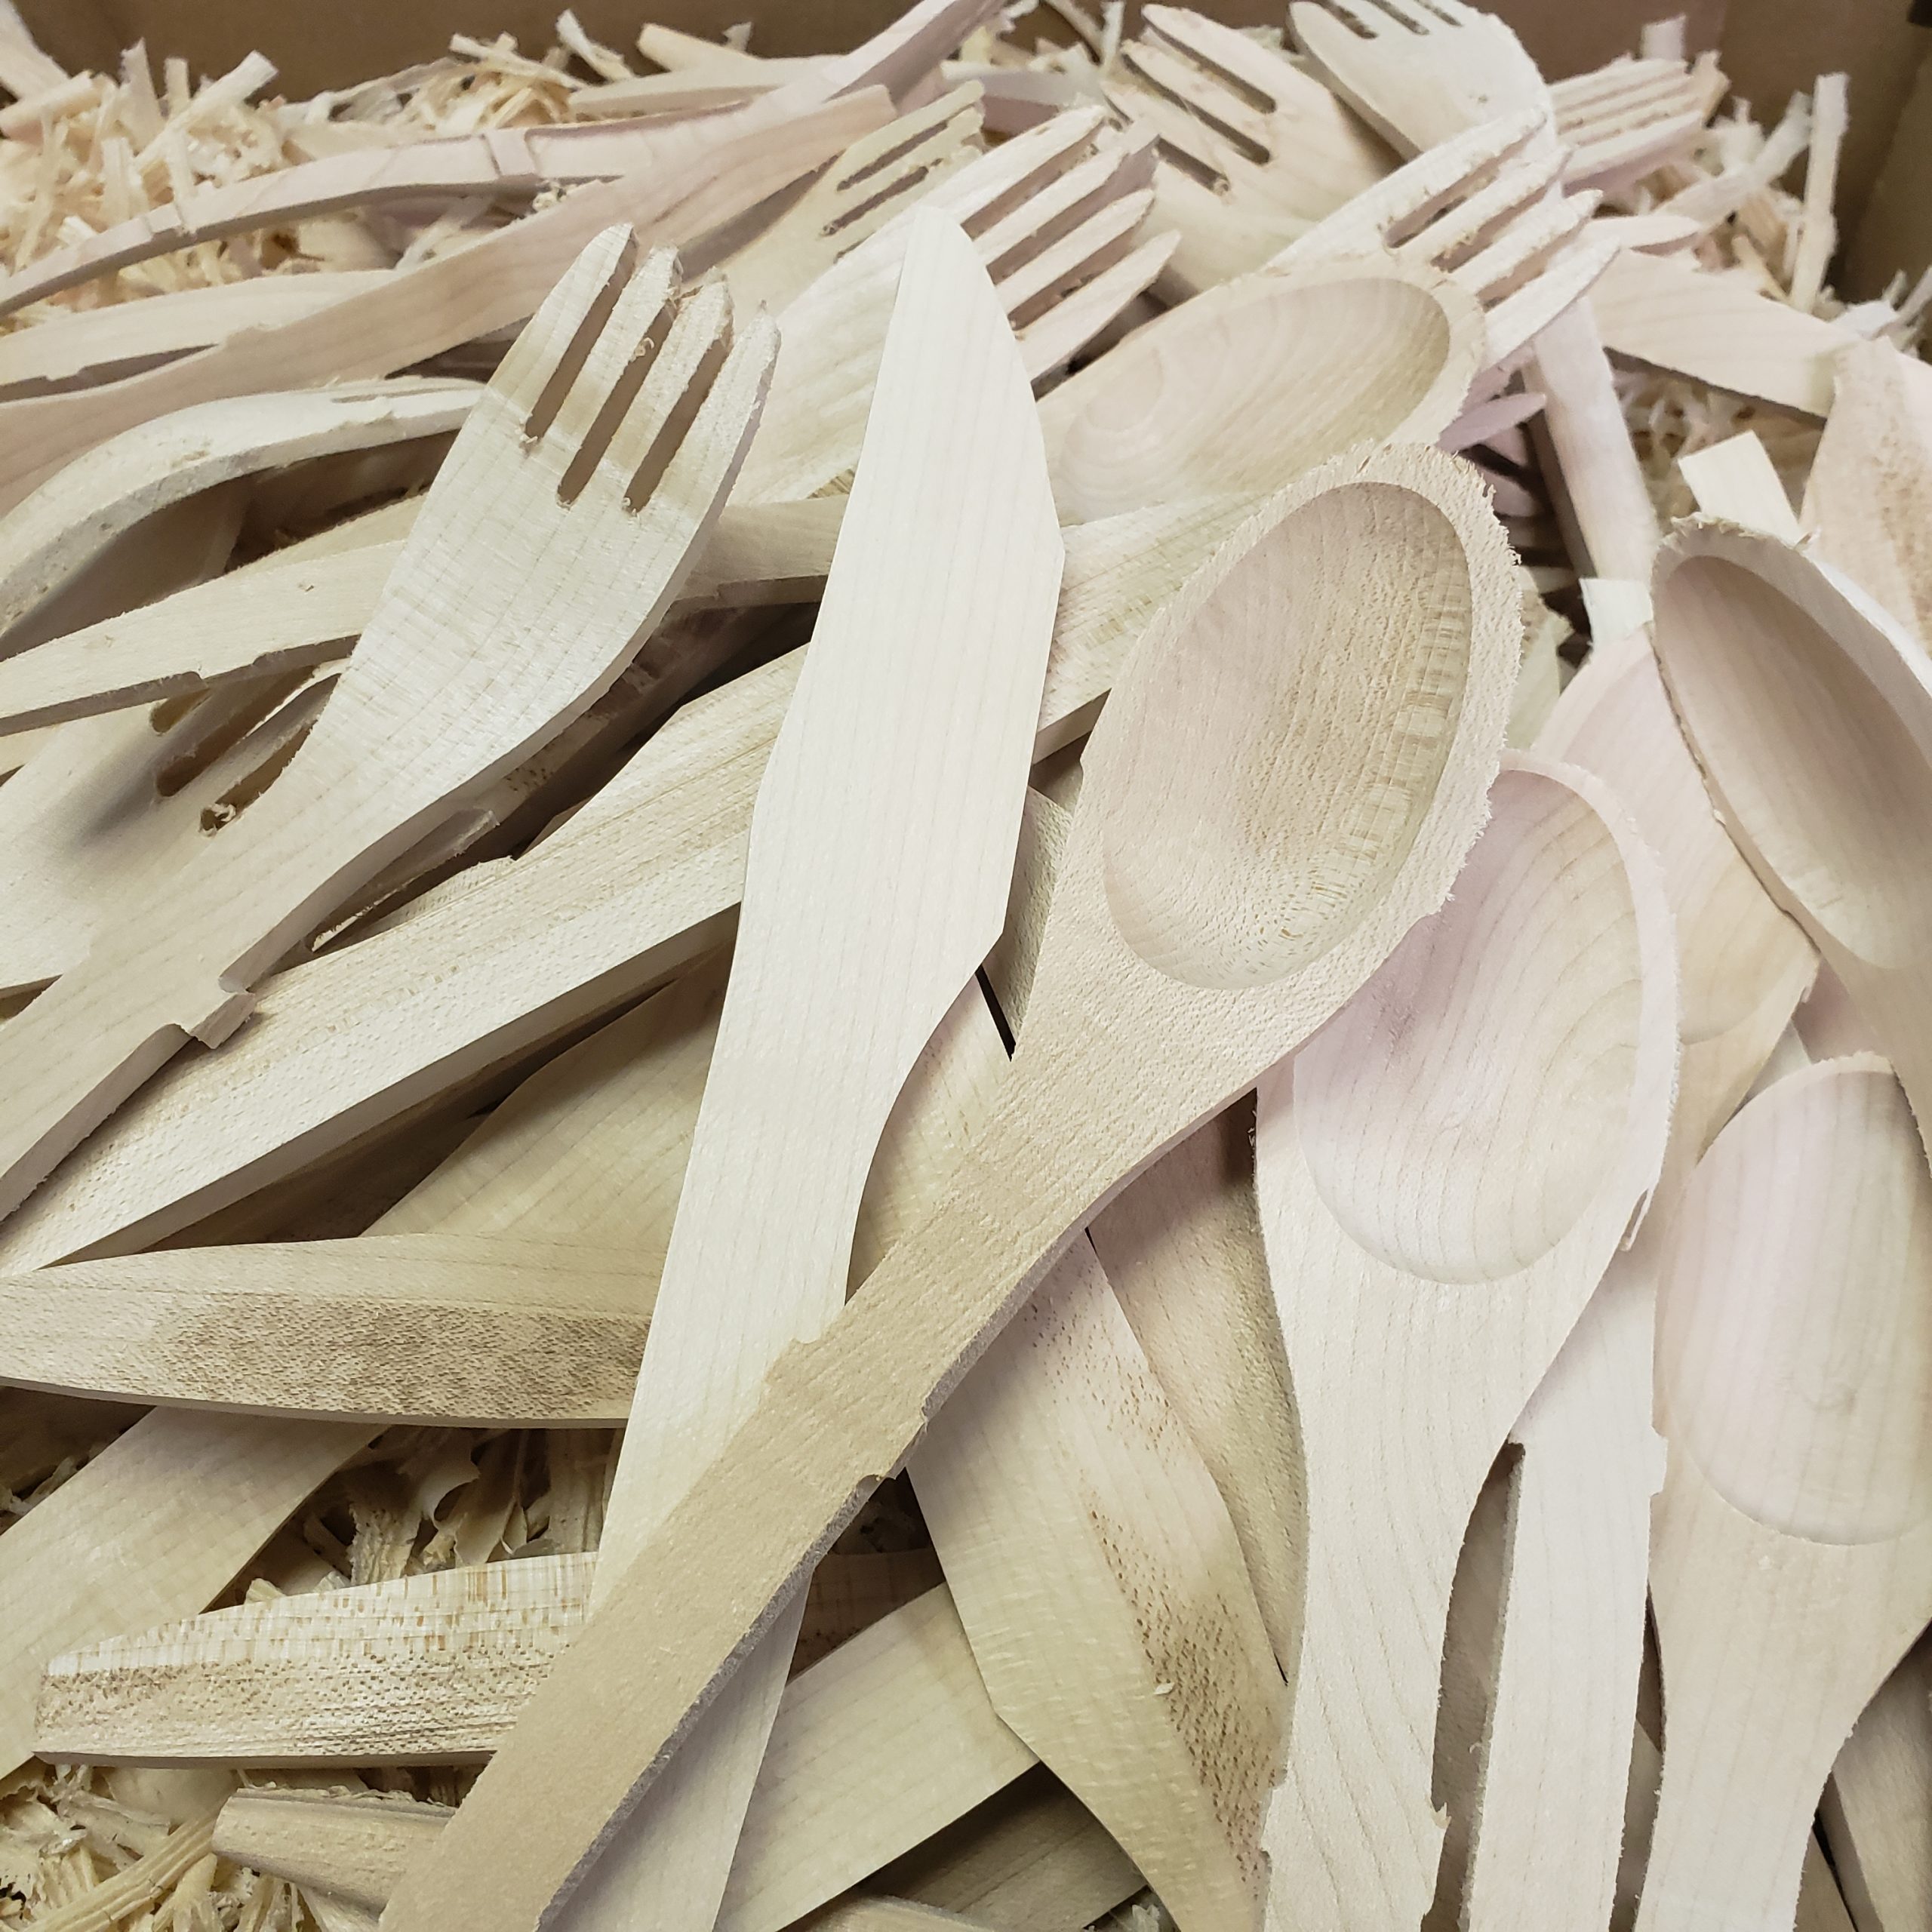 HOW ARE WOODEN UTENSILS MADE? 7 STEPS TO BEAUTIFUL UTENSILS